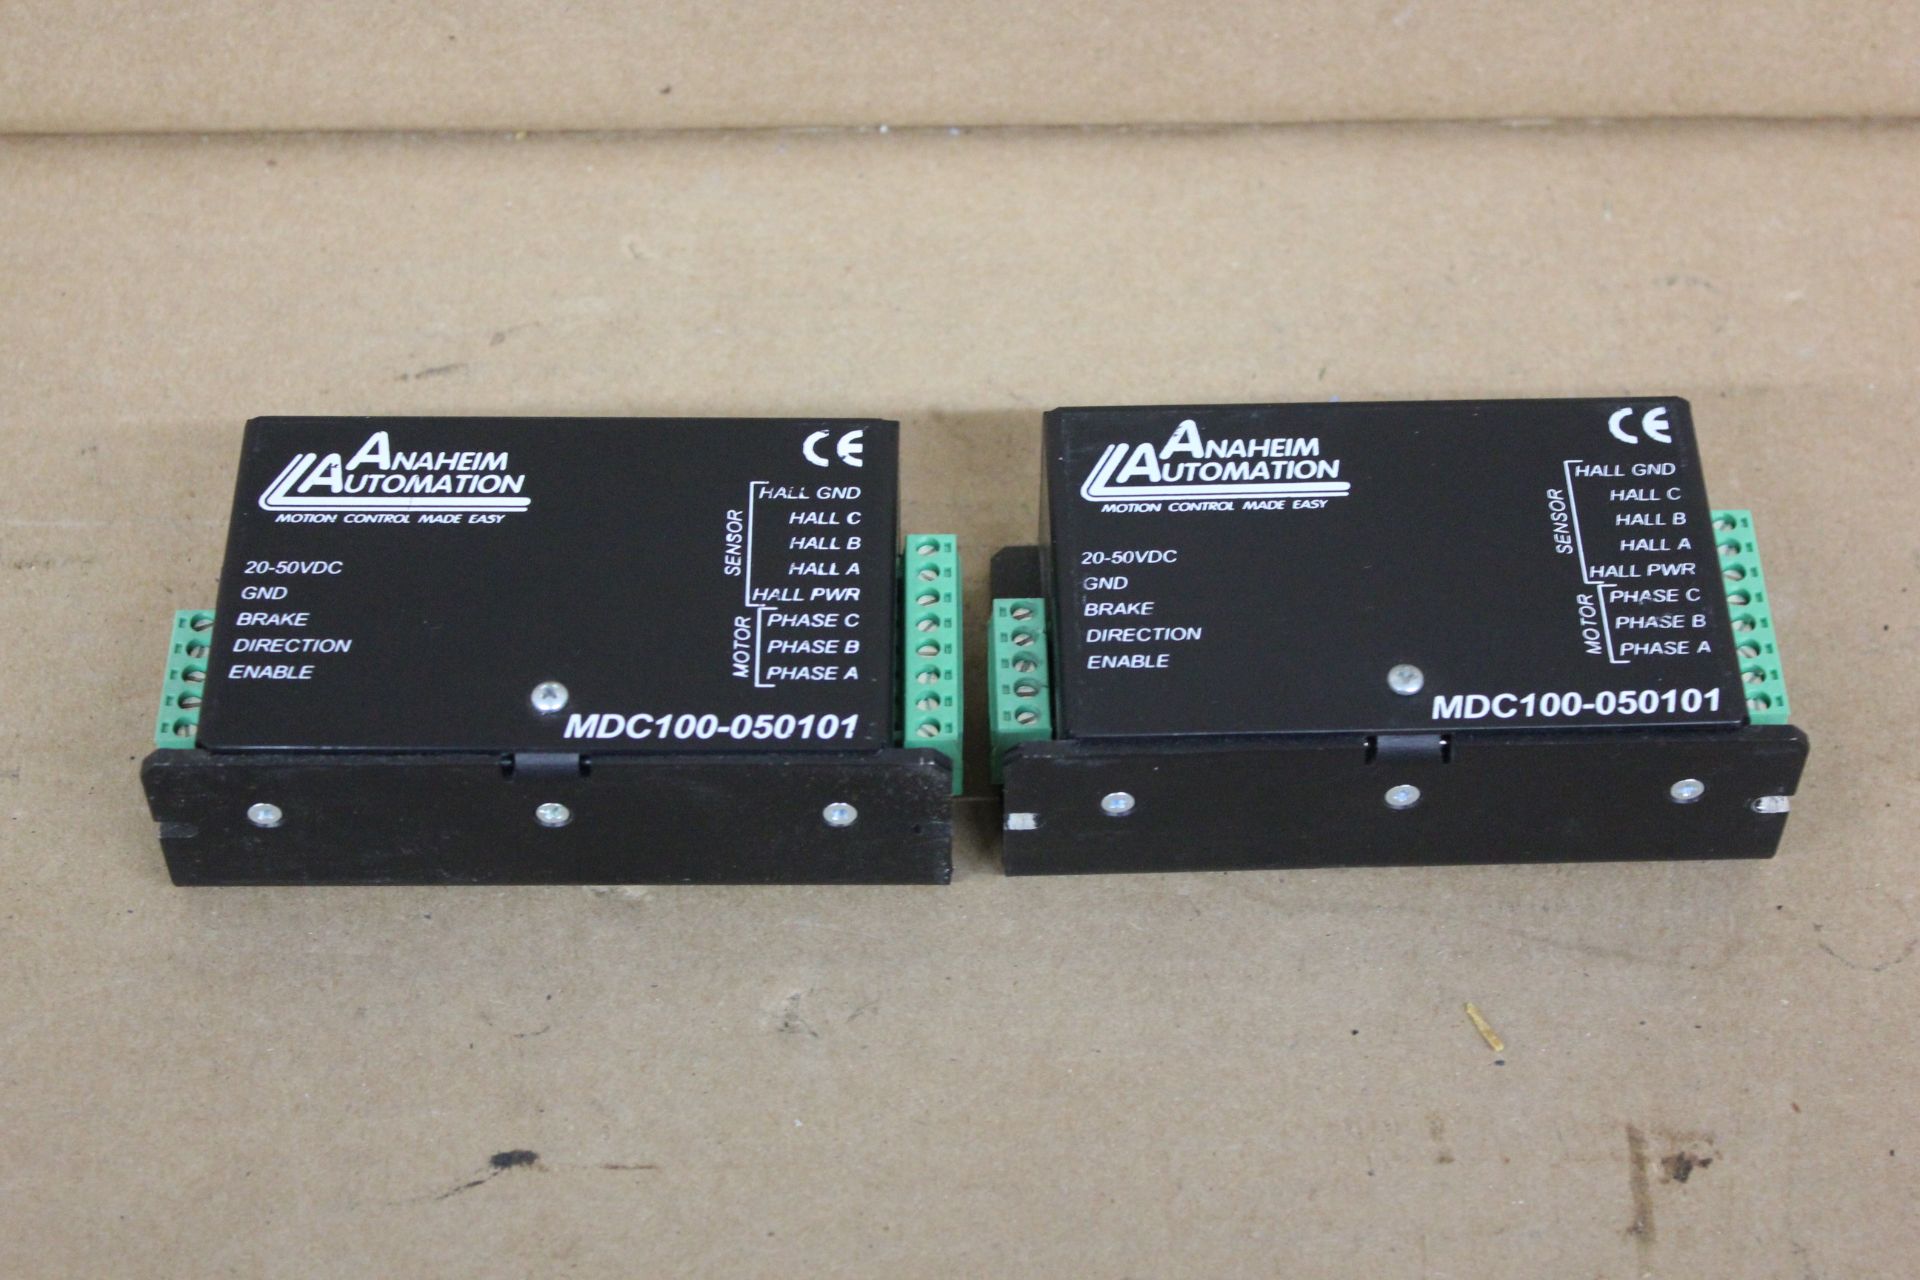 LOT OF ANAHEIM AUTOMATION BRUSHLESS DC MOTOR DRIVE SPEED CONTROLLER